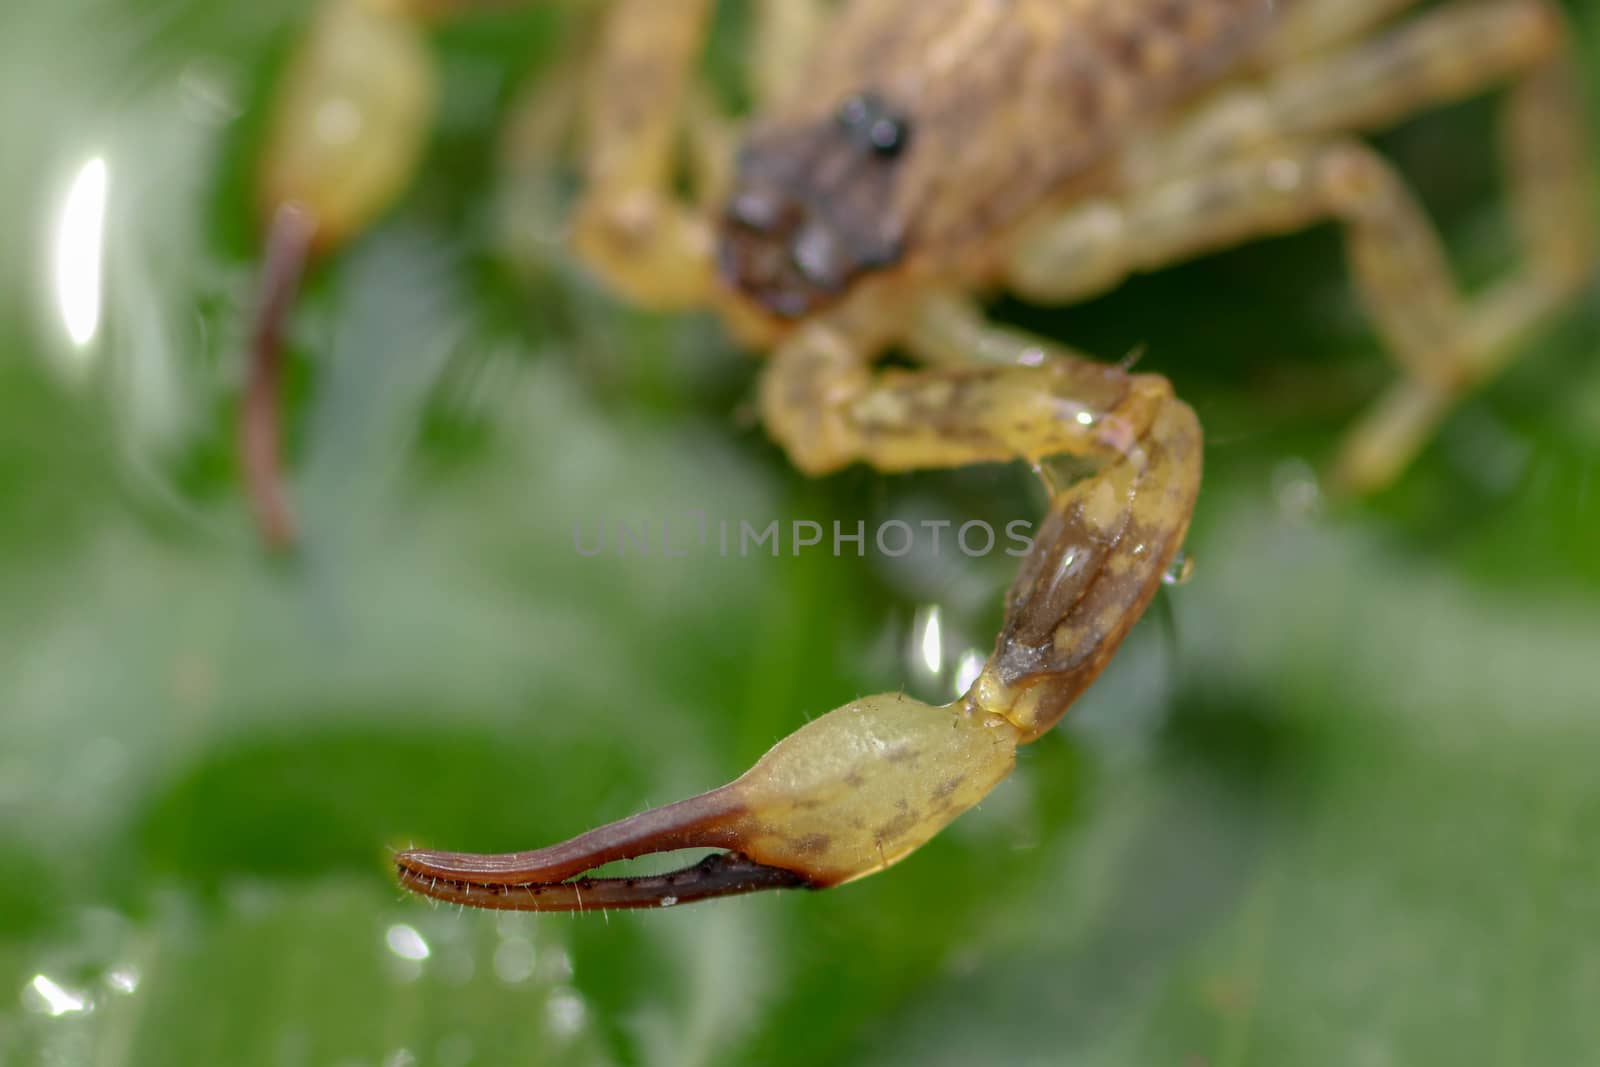 A scorpion pincer pedipalp up close. Swimming Scorpion, Chinese swimming scorpion or Ornate Bark Scorpion on a leaf in a tropical jungle by Sanatana2008